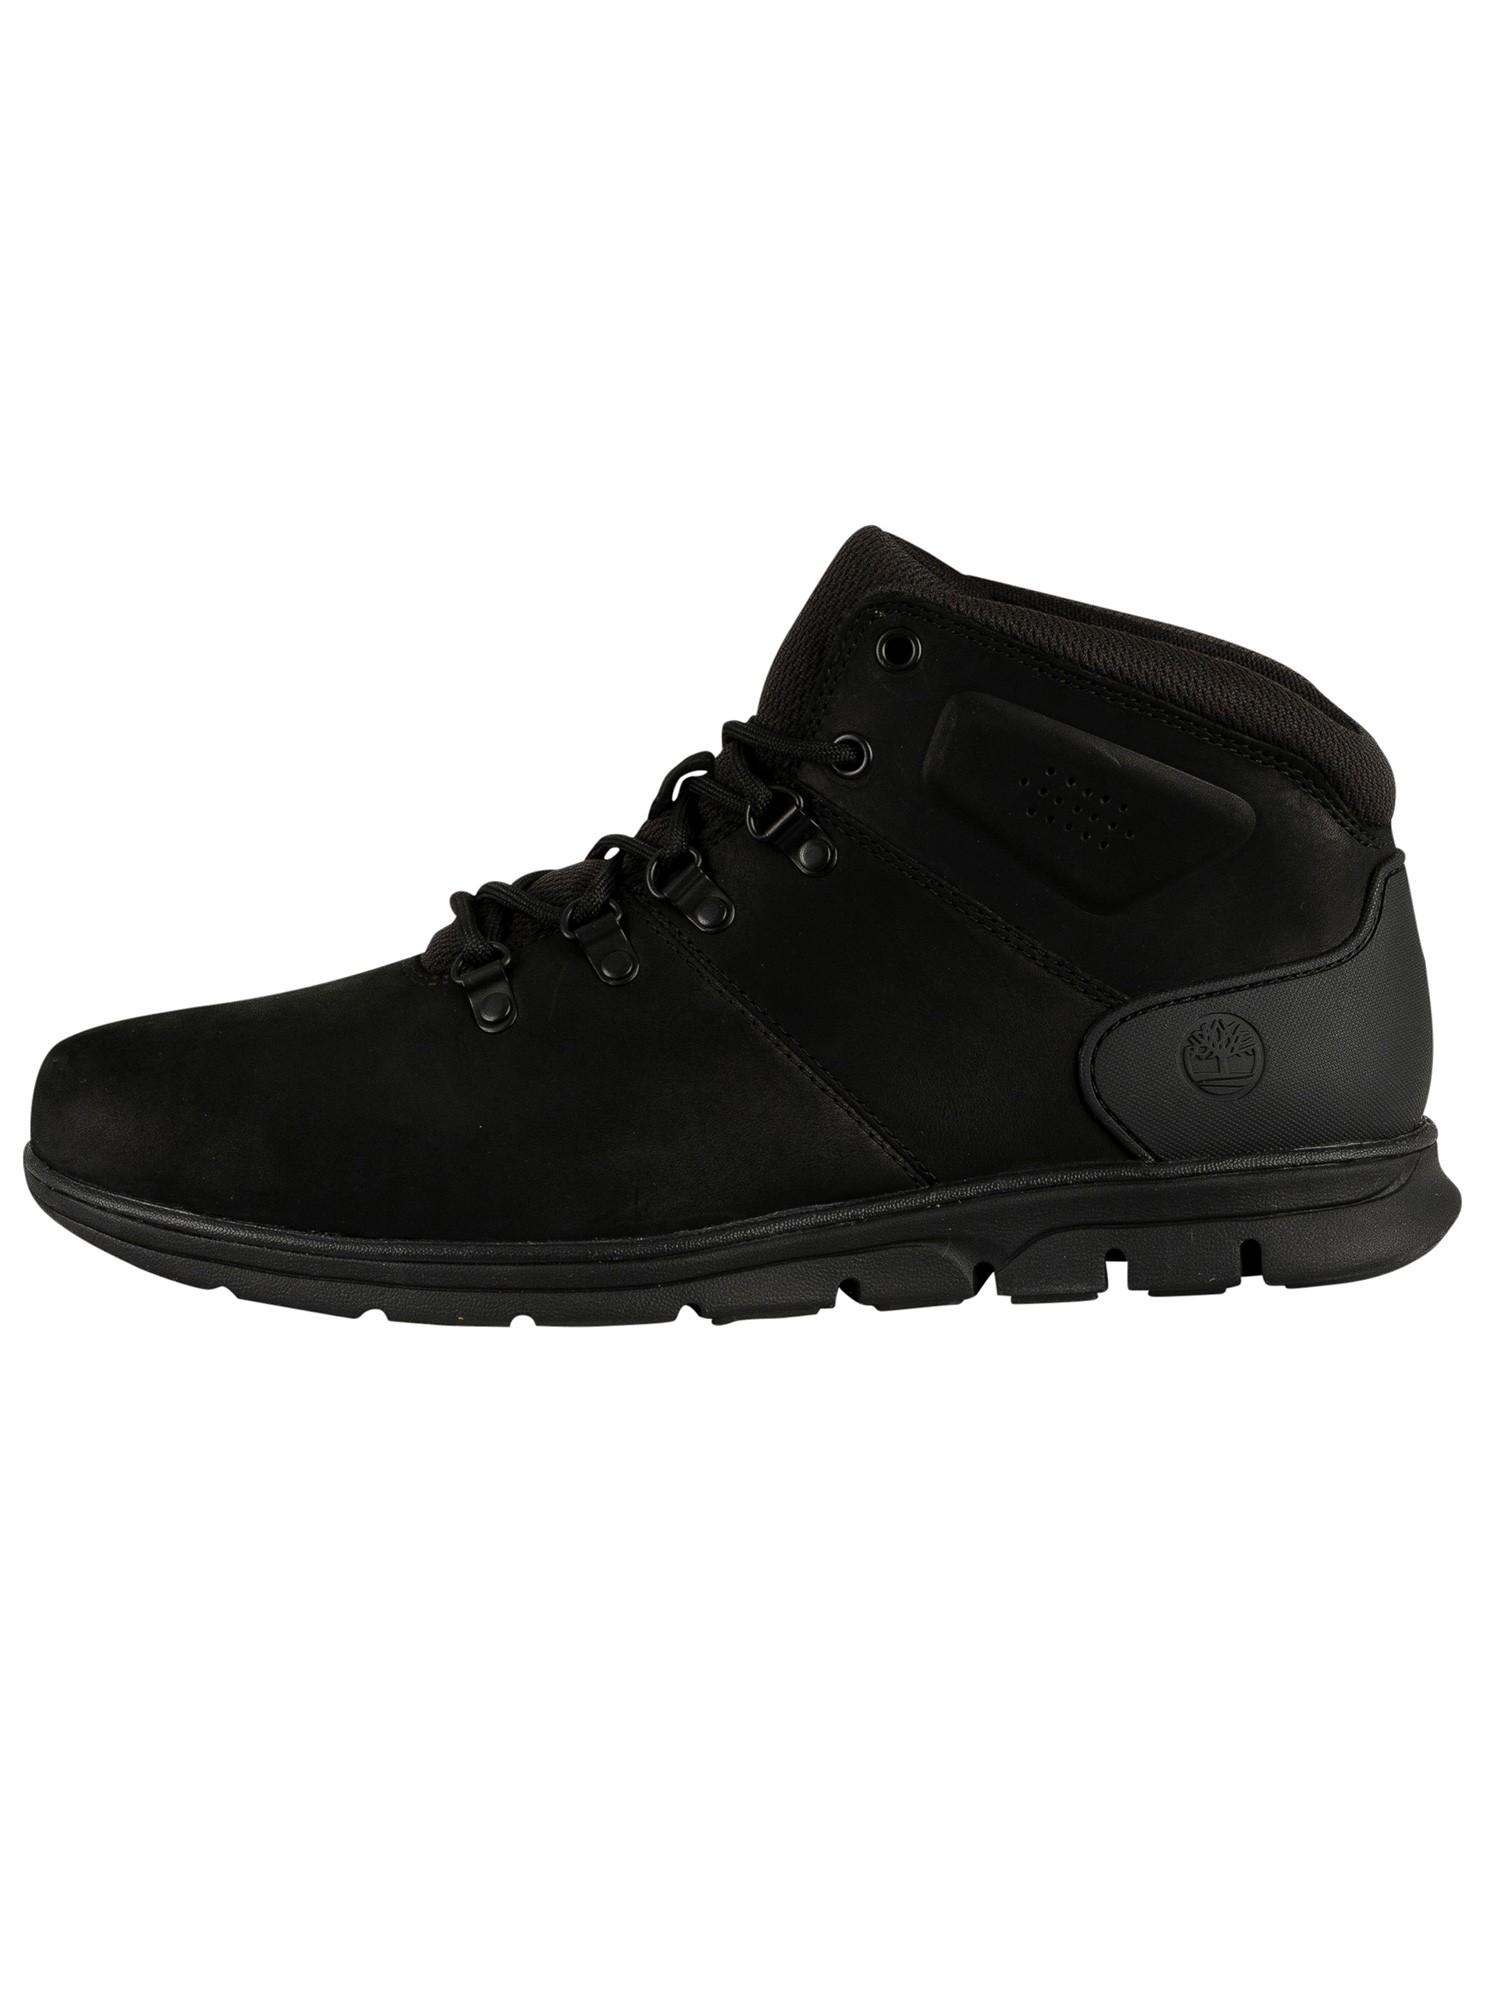 Timberland Lace Bradstreet Mid Hiker Boots in Black Nubuck (Black) for Men  - Lyst